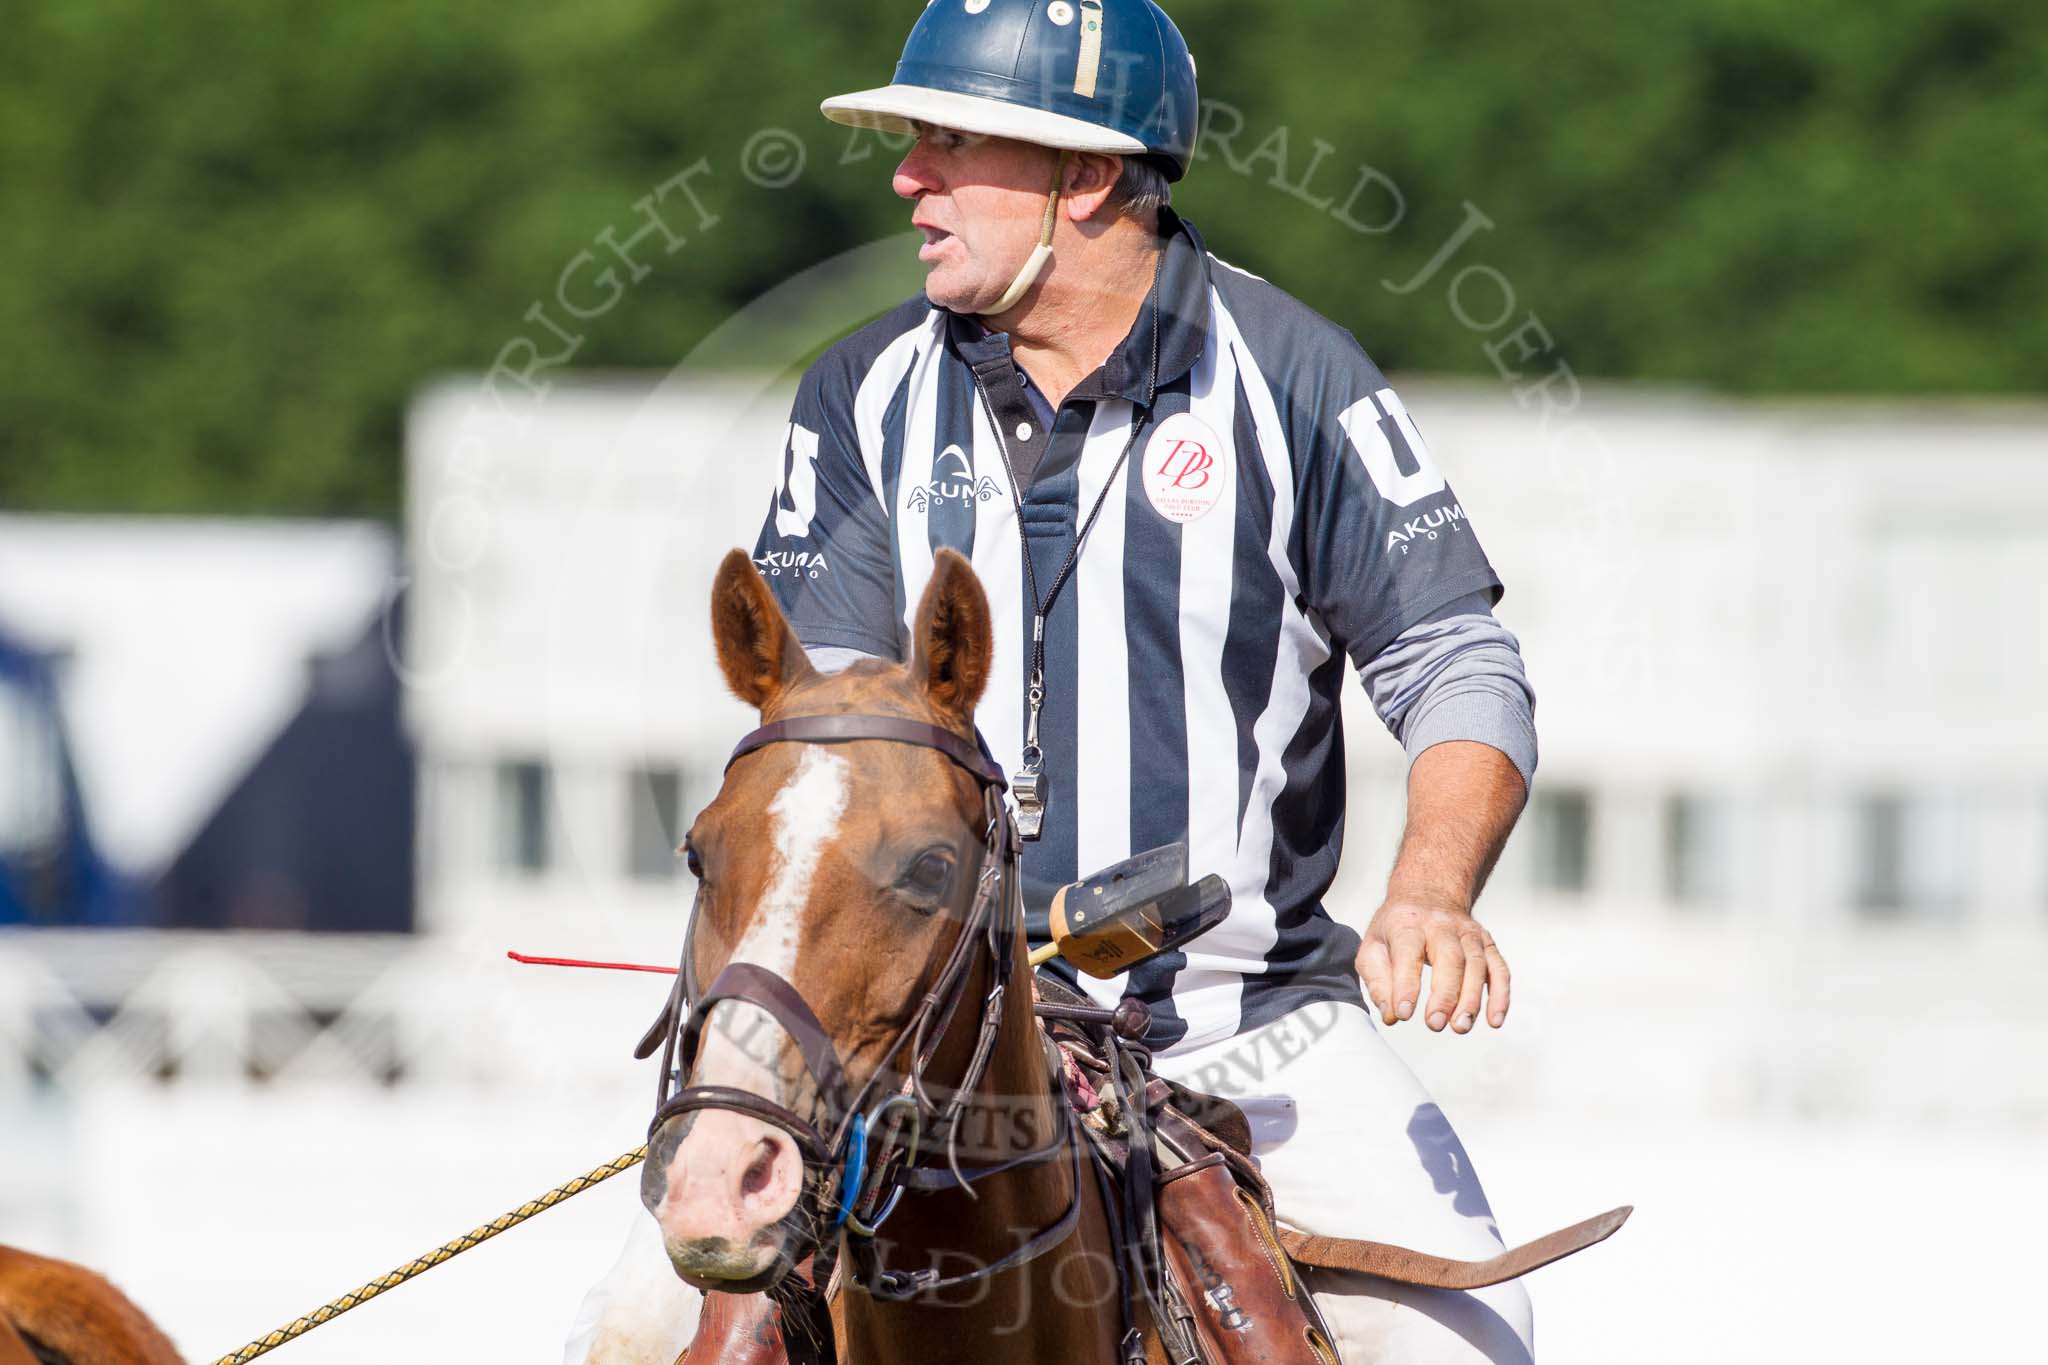 DBPC Polo in the Park 2013, Subsidiary Final Amaranther Trophy (0 Goal), Leadenham vs Kingsbridge: Umpire Huw Beaven before the start of the first match of the day..
Dallas Burston Polo Club, ,
Southam,
Warwickshire,
United Kingdom,
on 01 September 2013 at 10:19, image #25